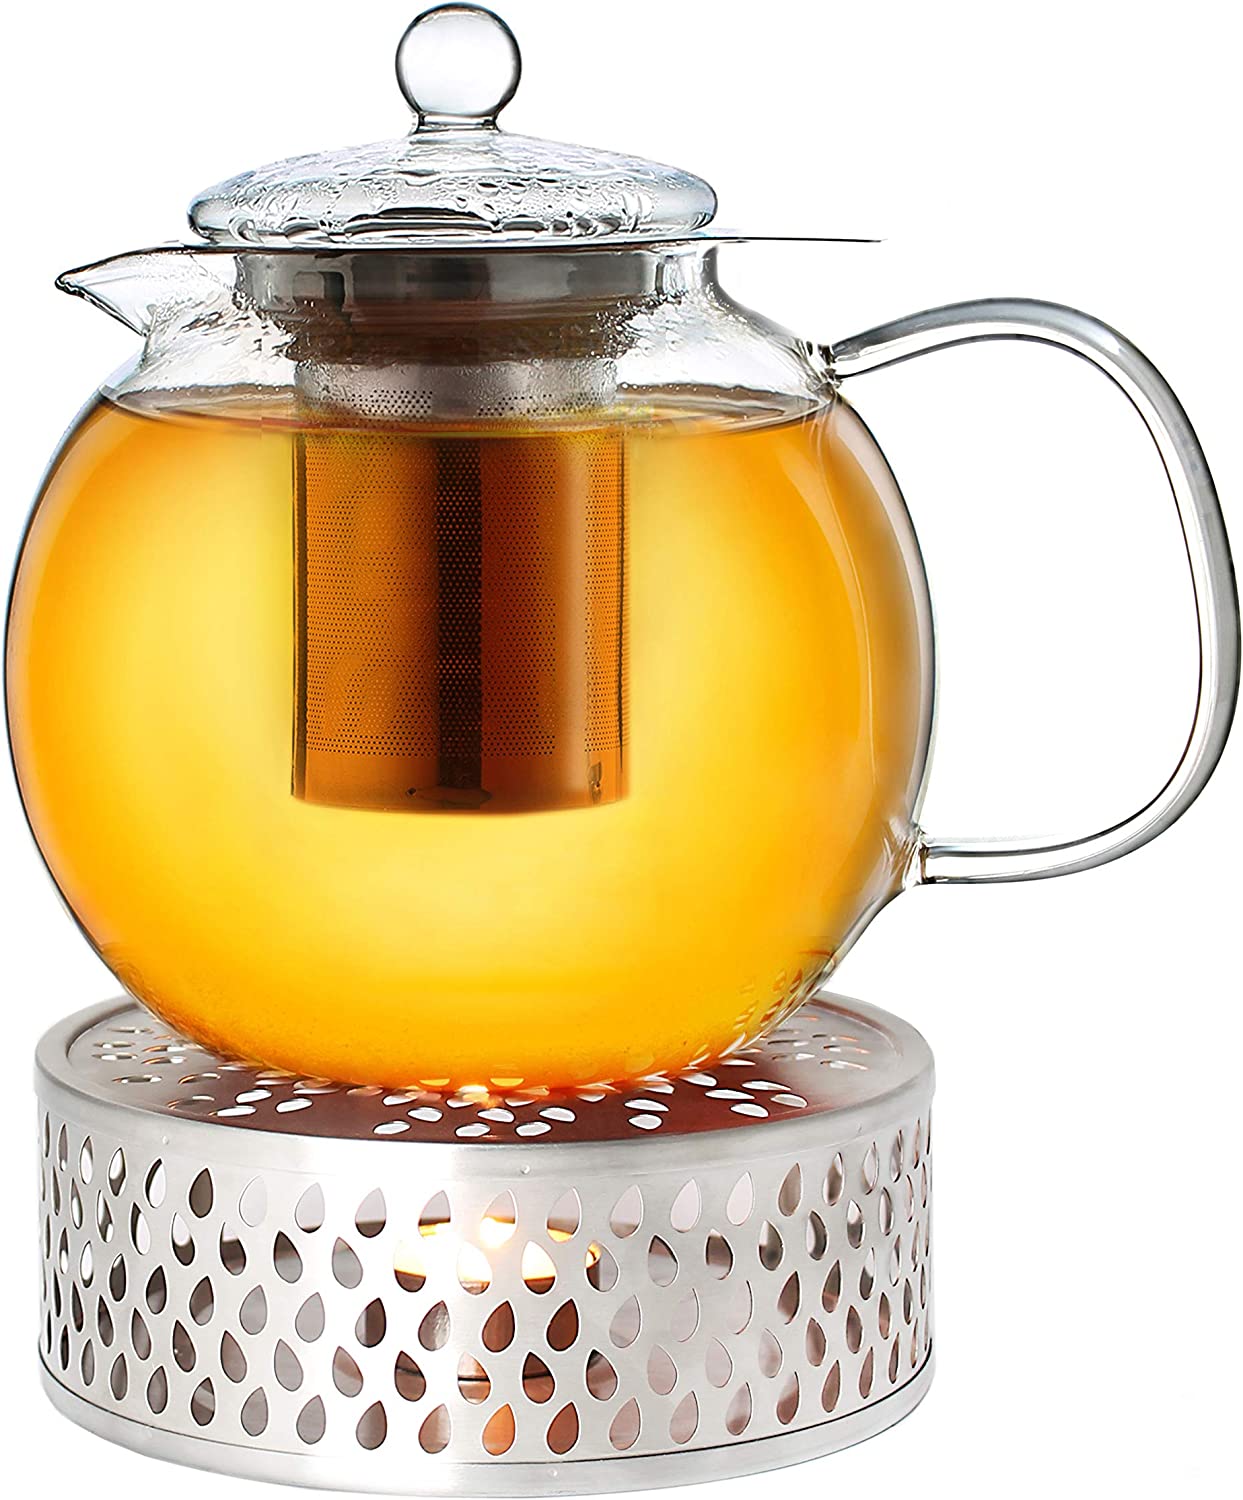 Creano Glass Teapot 1.7 L 3-Part Tea Maker with Integrated Stainless Steel Strainer and Glass Lid, Ideal for Making Loose Teas, Drip Free, All-in-One